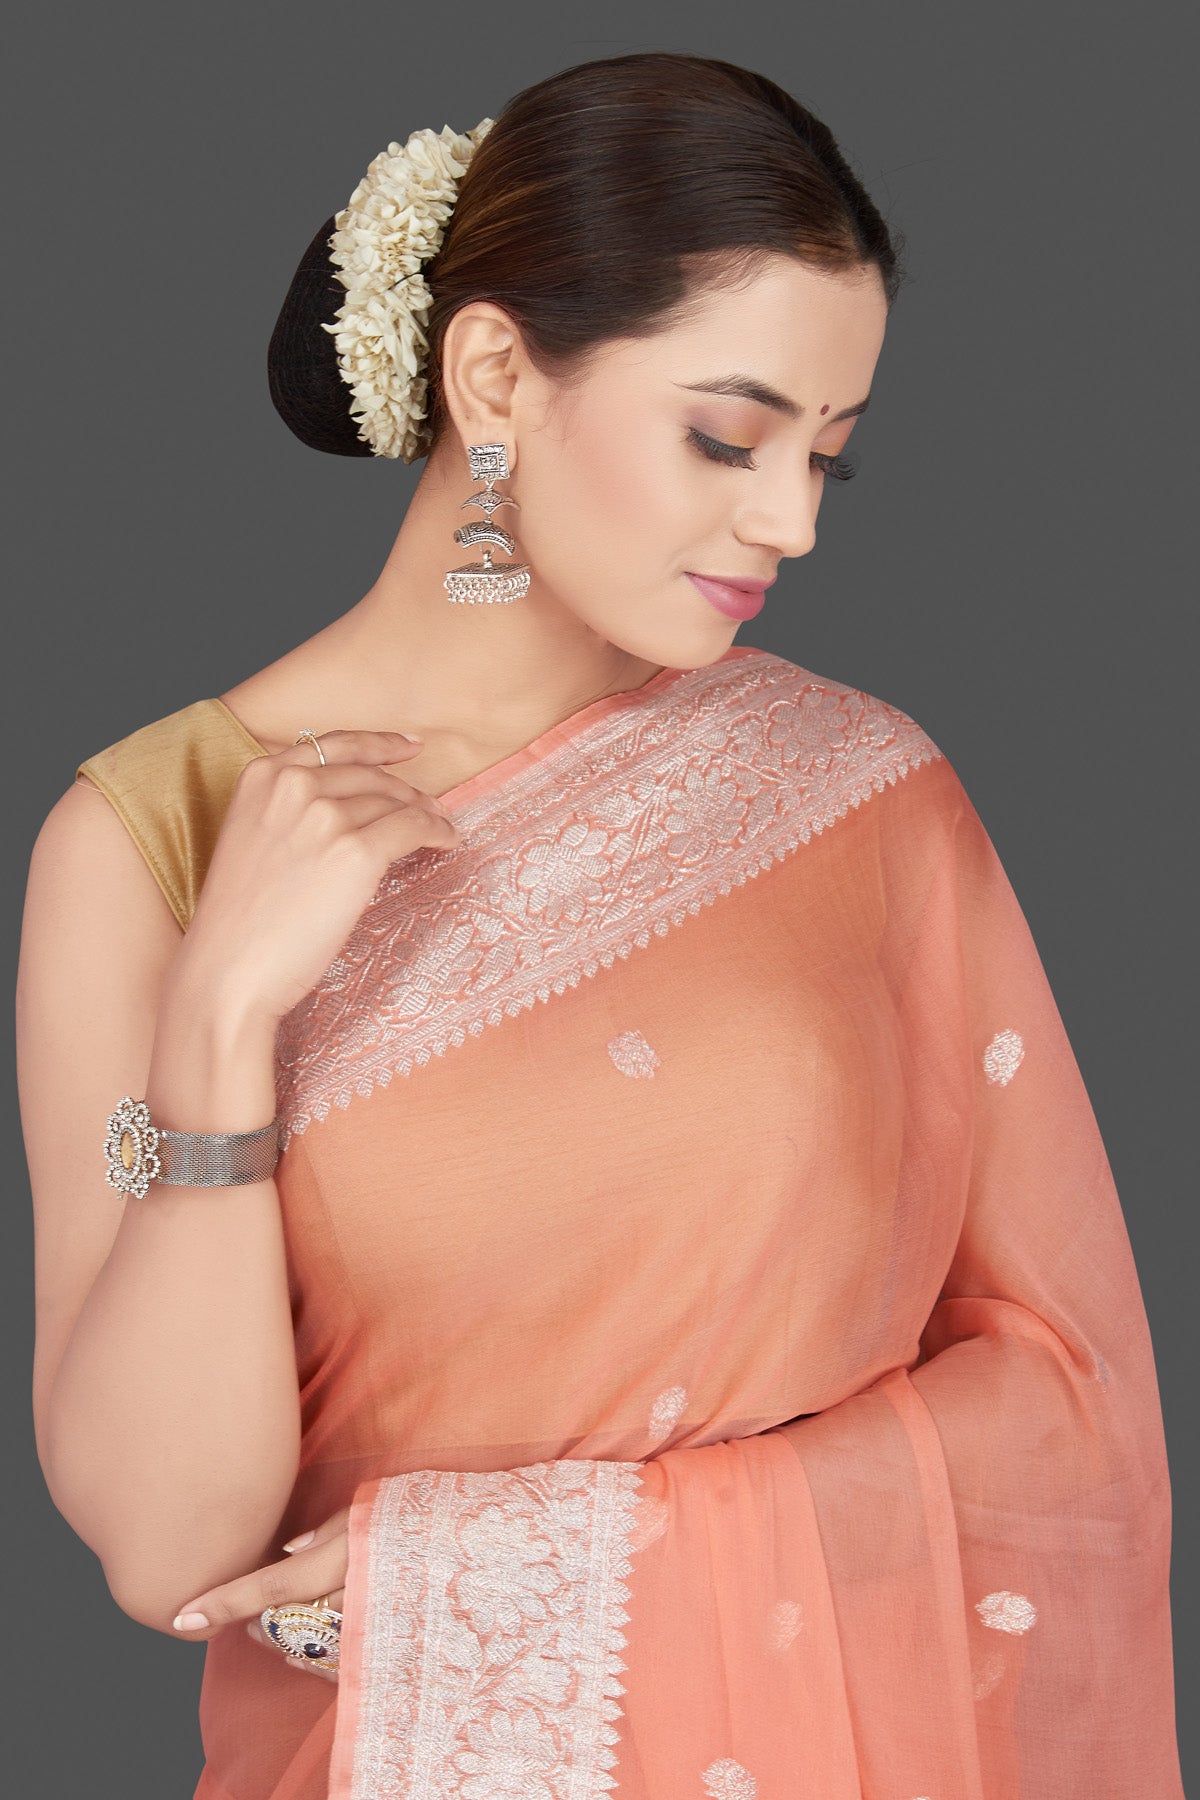 Buy stunning peach color georgette chiffon saree online in USA with silver zari border. Go for stunning Indian designer sarees, georgette sarees, handwoven sarees, embroidered sarees for festive occasions and weddings from Pure Elegance Indian clothing store in USA.-closeup